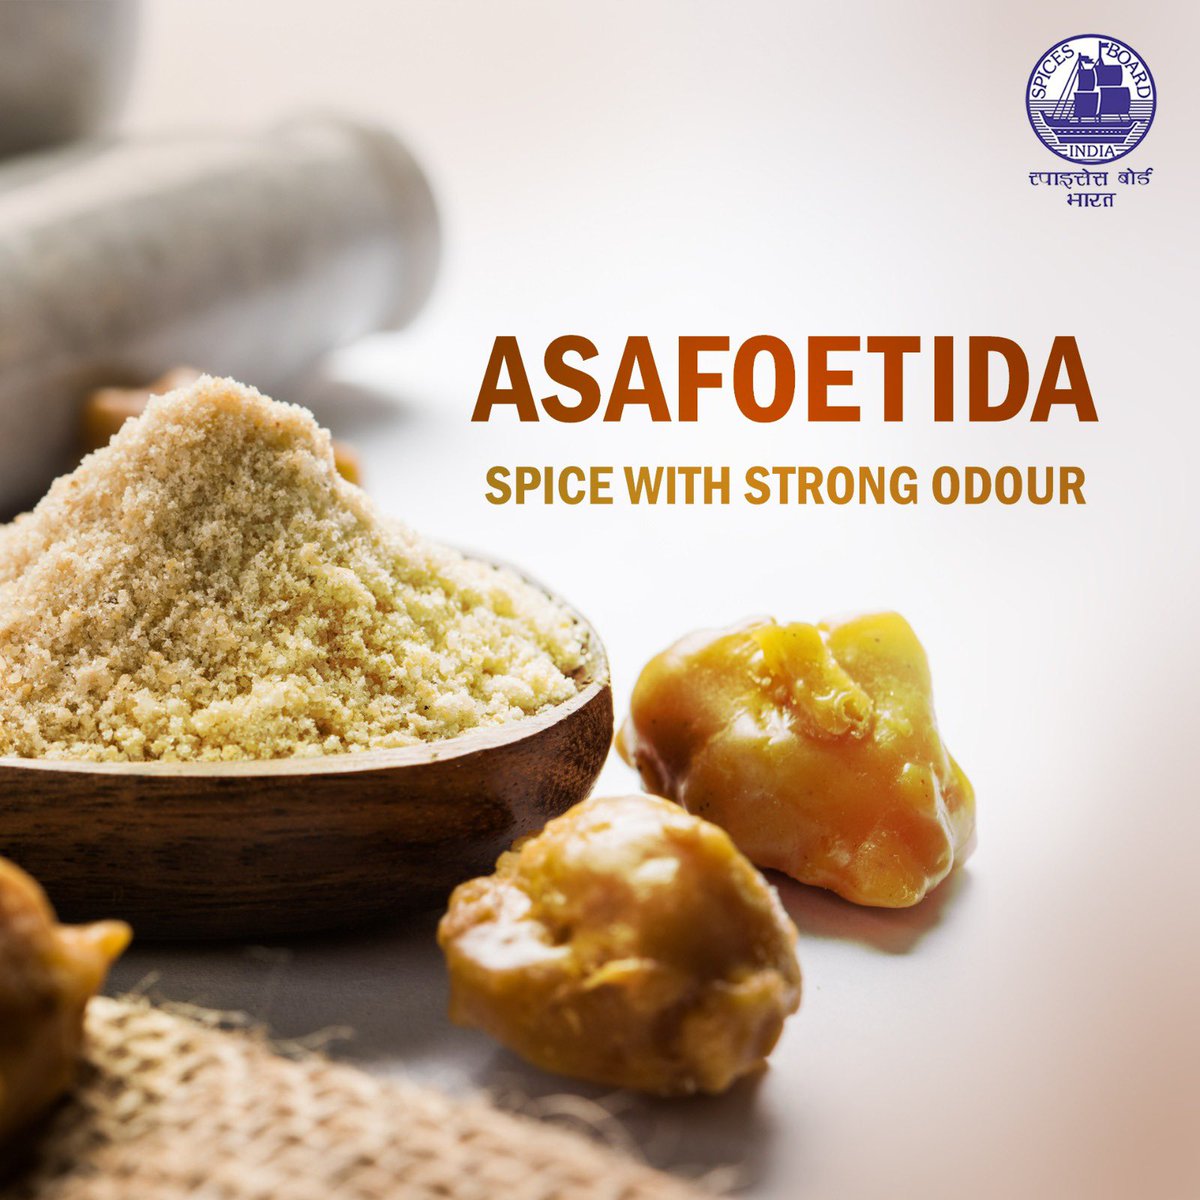 This spice is an ultimate flavor enhancer with the strongest odour @doc_goi #spicesboard #asafoetida #incrediblespicesofindia